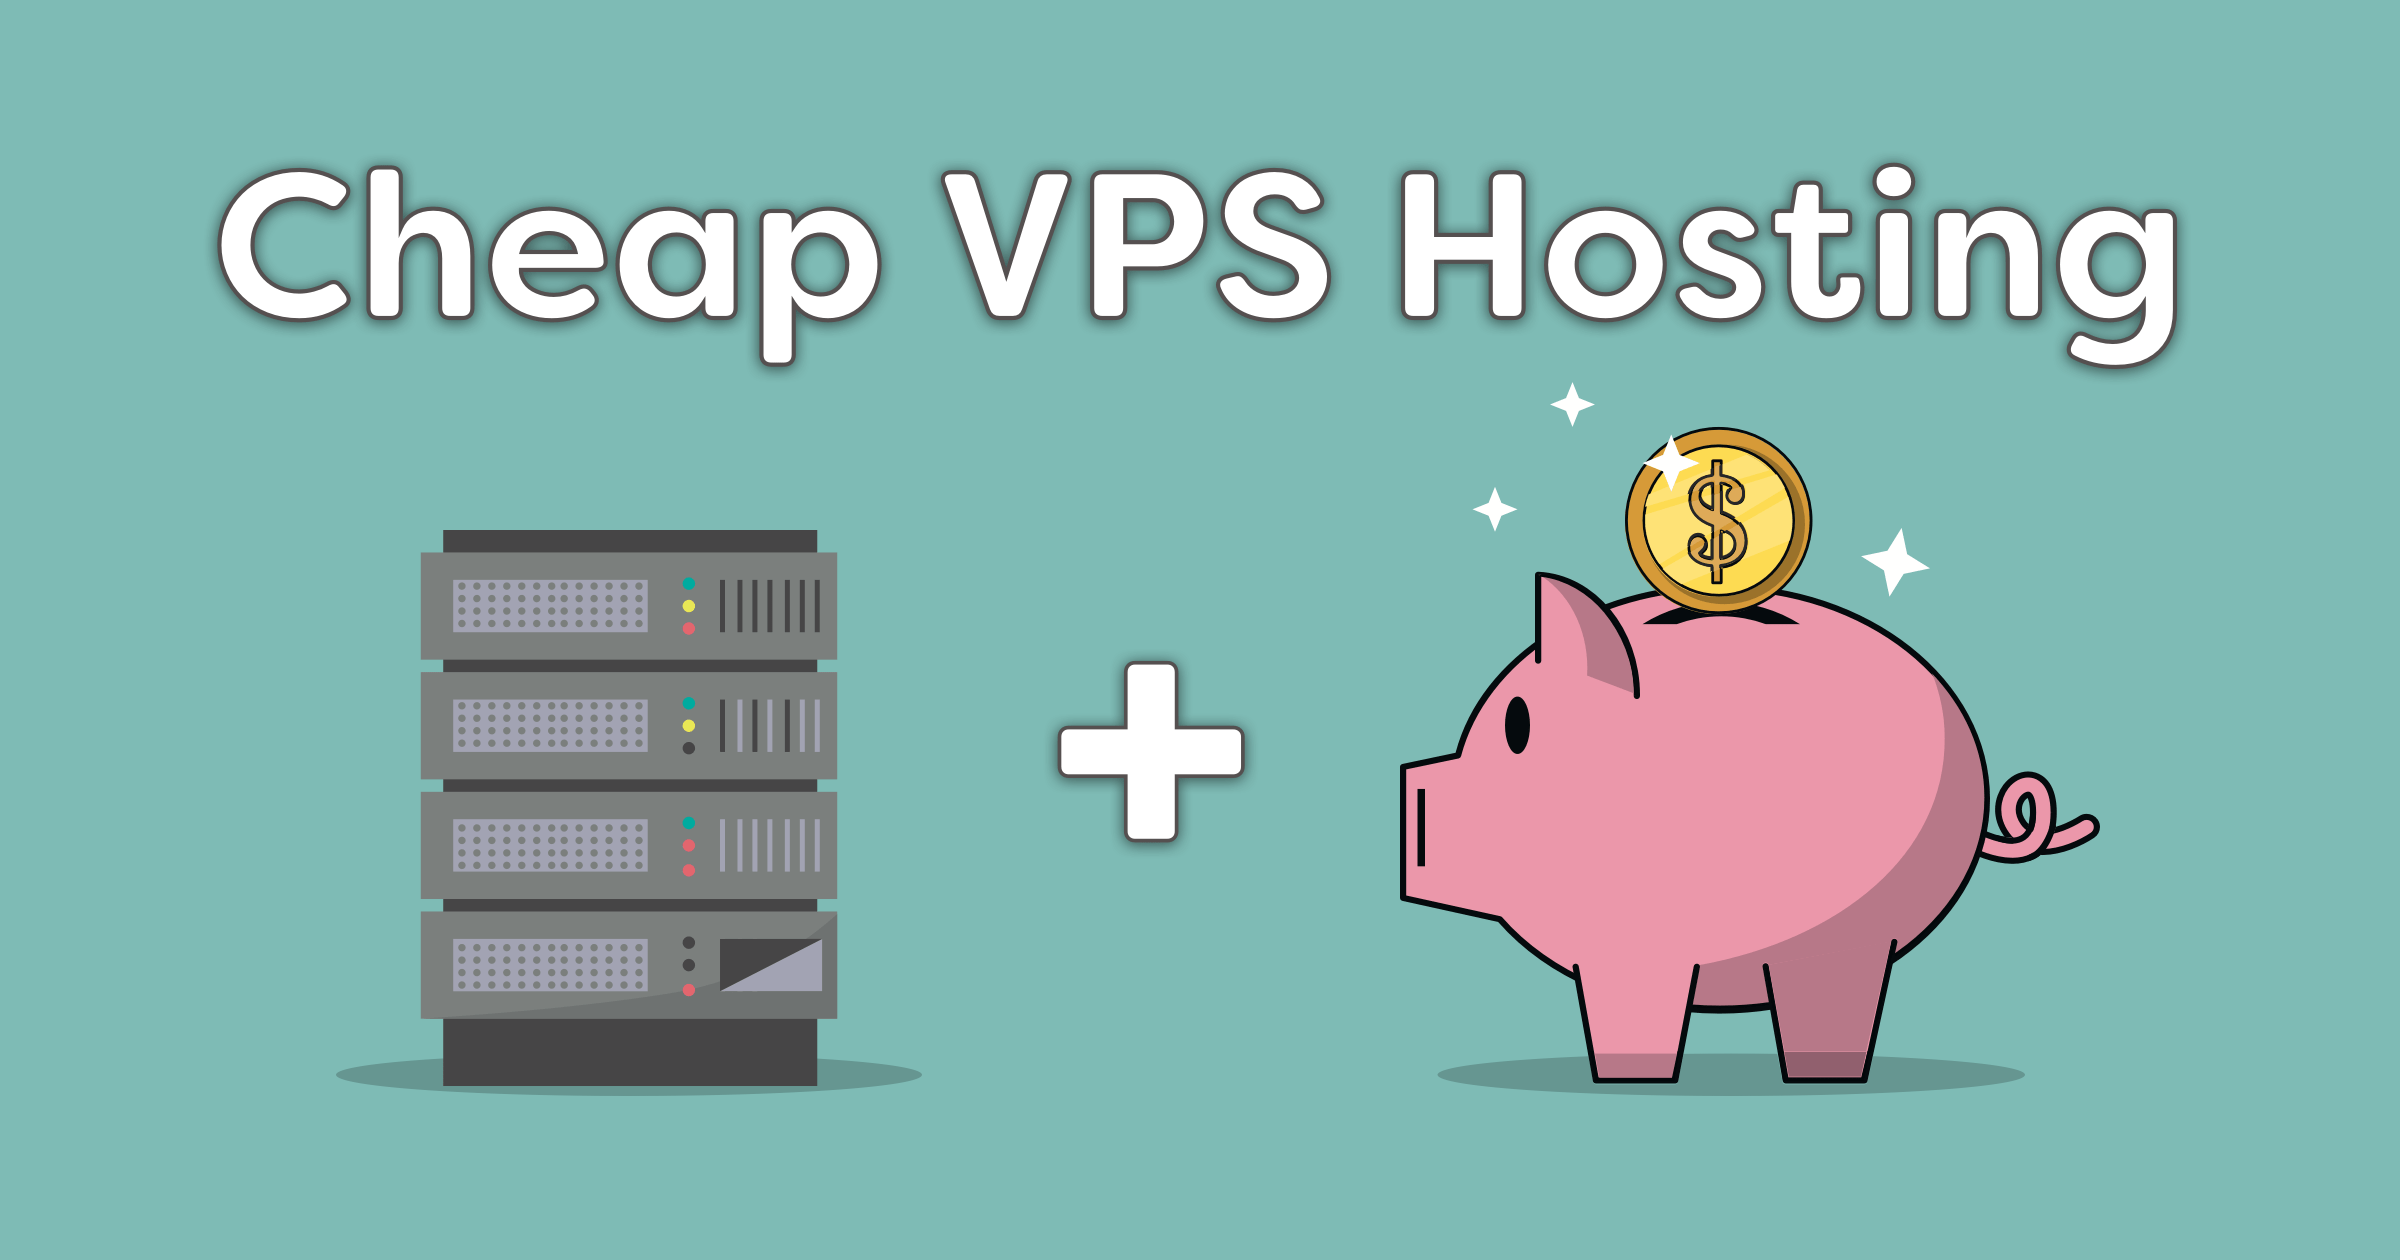 6 Best Cheap And Reliable Vps Hosting Services In 2020 2020 Images, Photos, Reviews